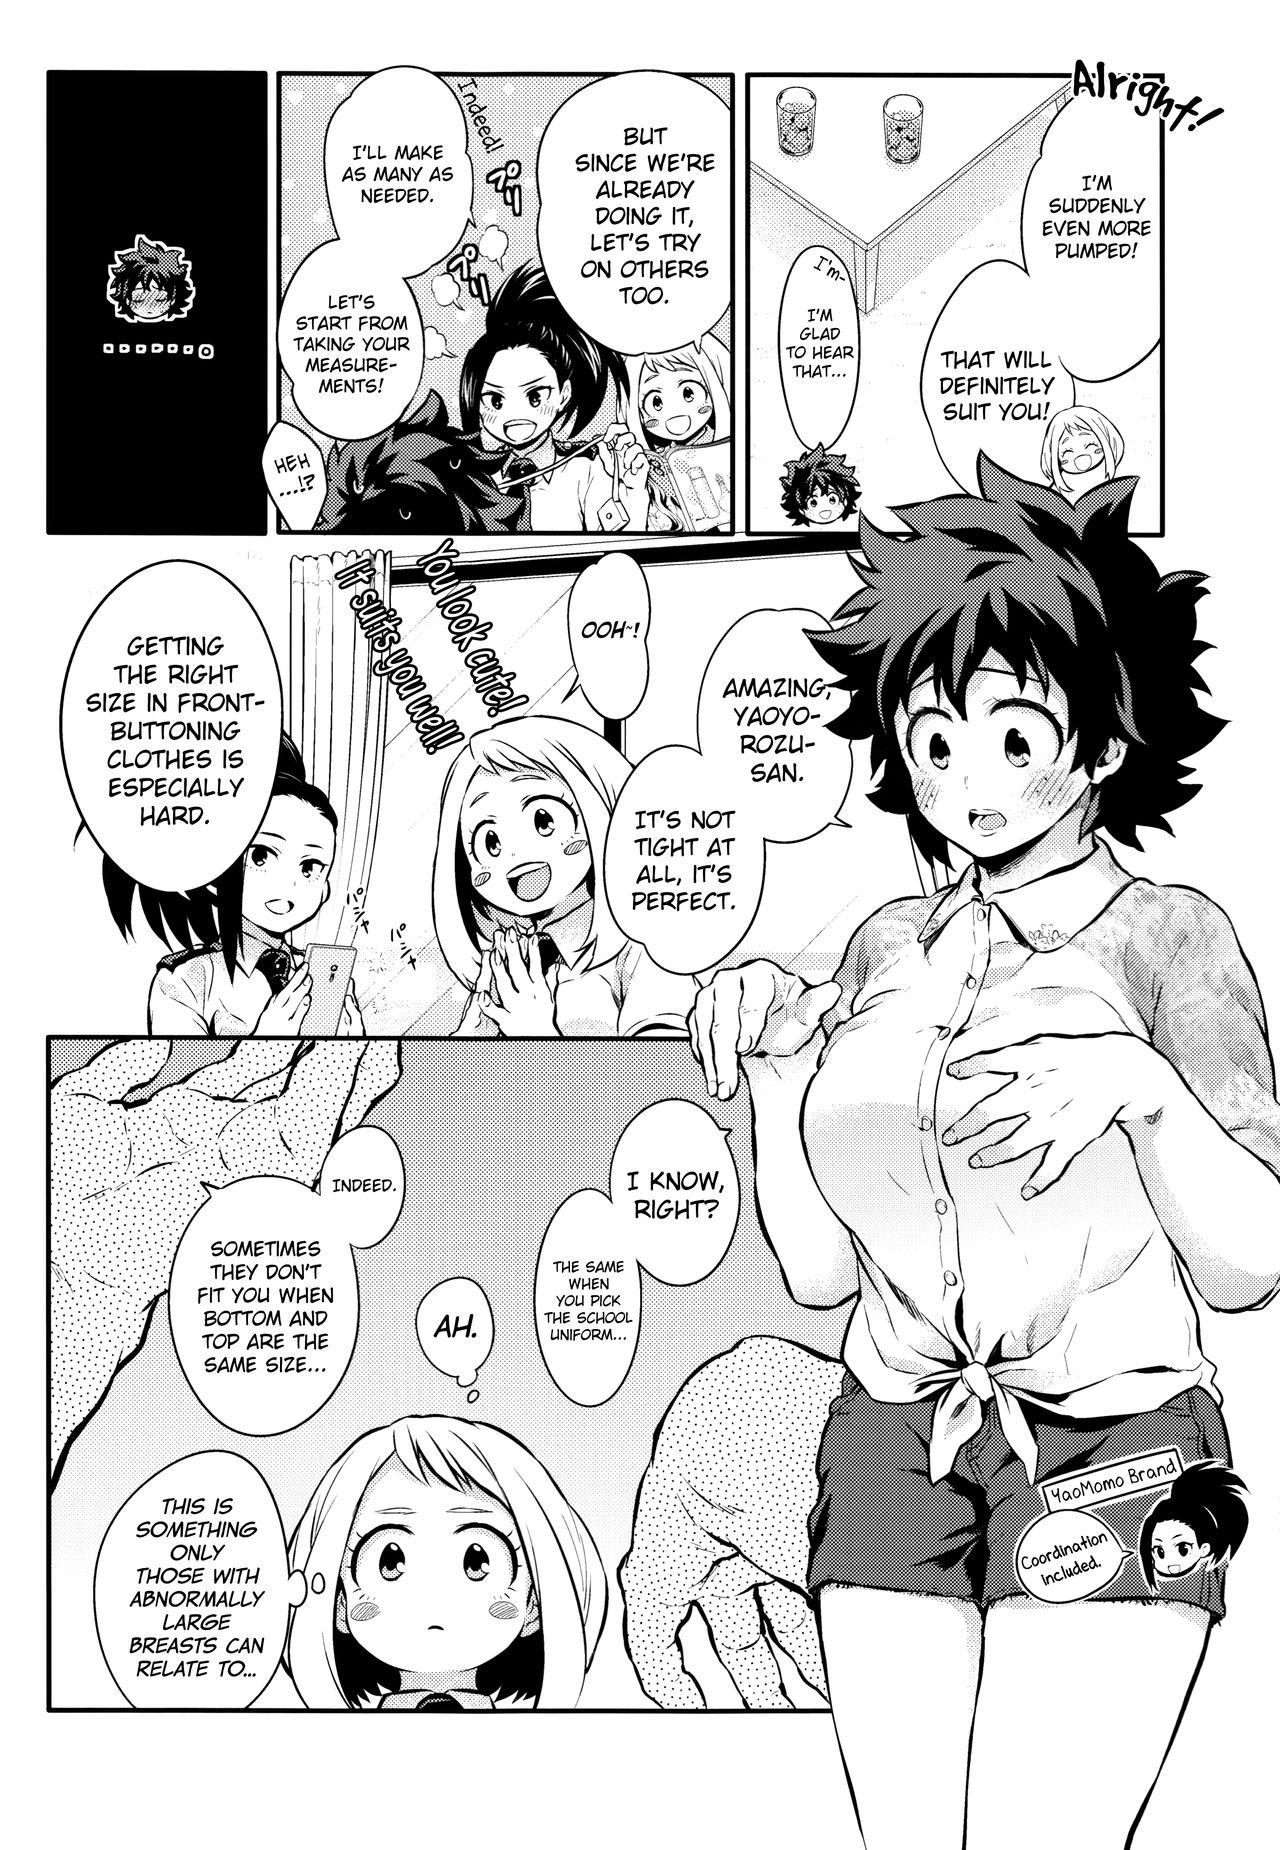 Gay Bareback Love Me Tender another story - My hero academia Webcamshow - Page 6